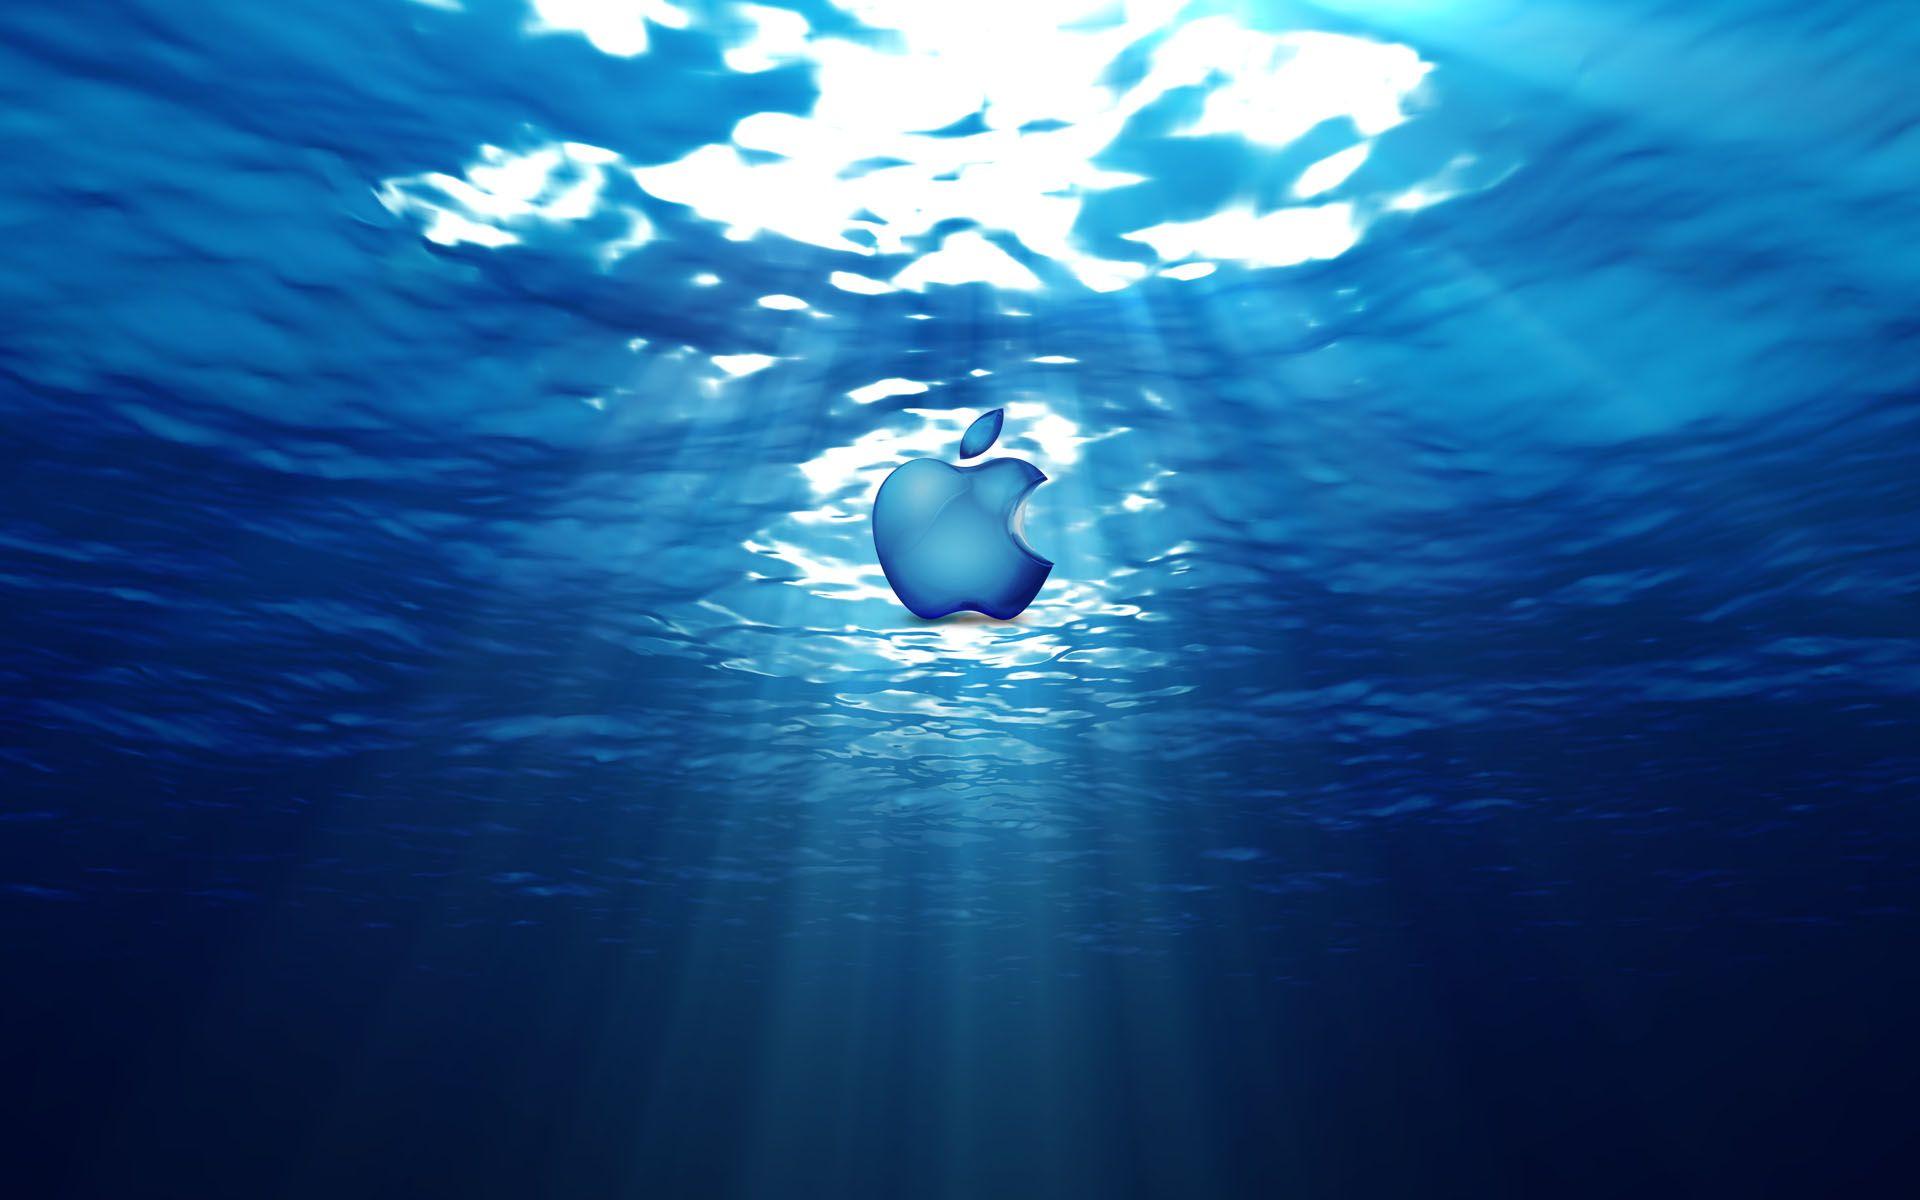 Apple Screen wallpaper and image, picture, photo